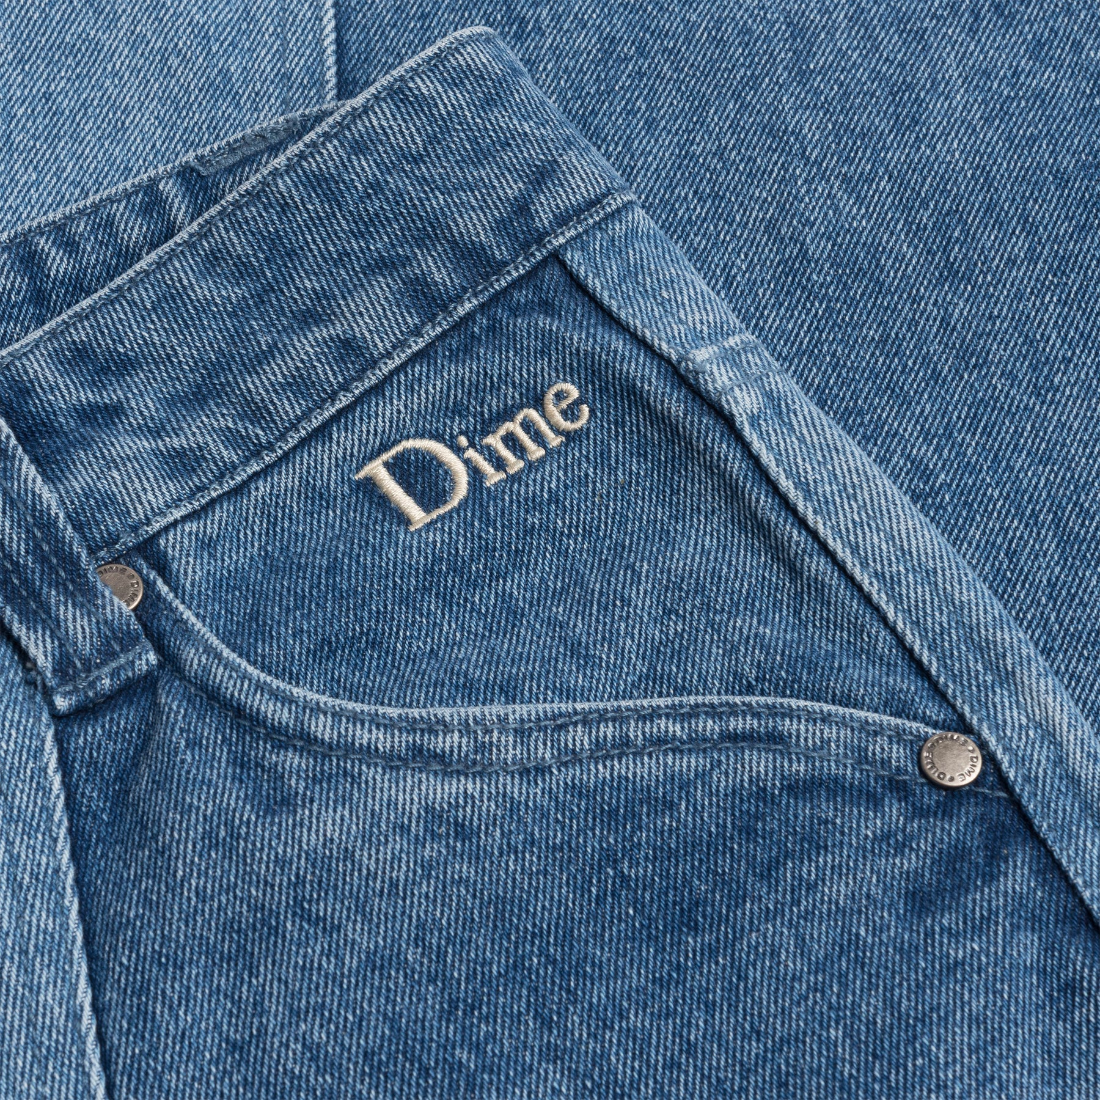 【Dime】Blocked Relaxed Denim Pants - Blue washed